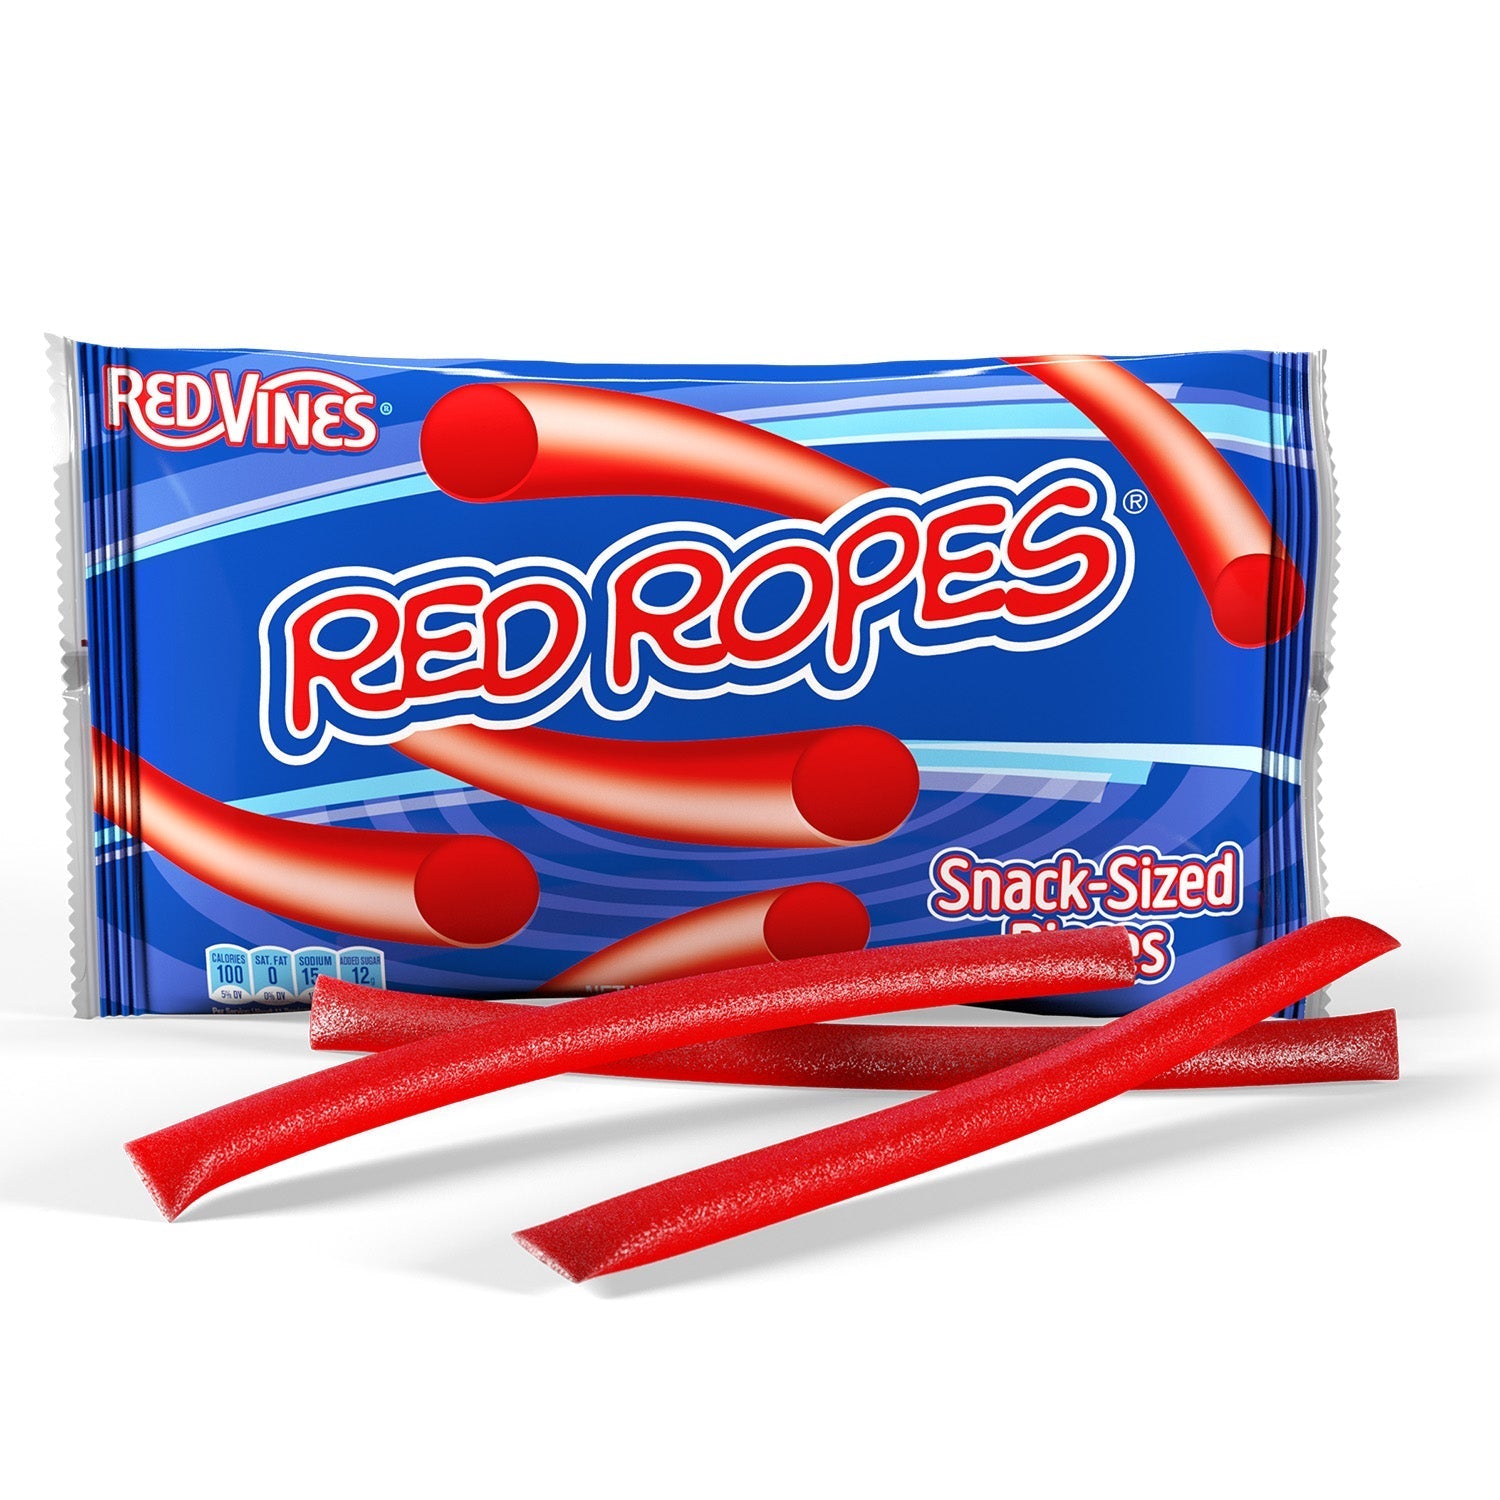 Red Vines Red Ropes® Licorice Ropes 12 oz